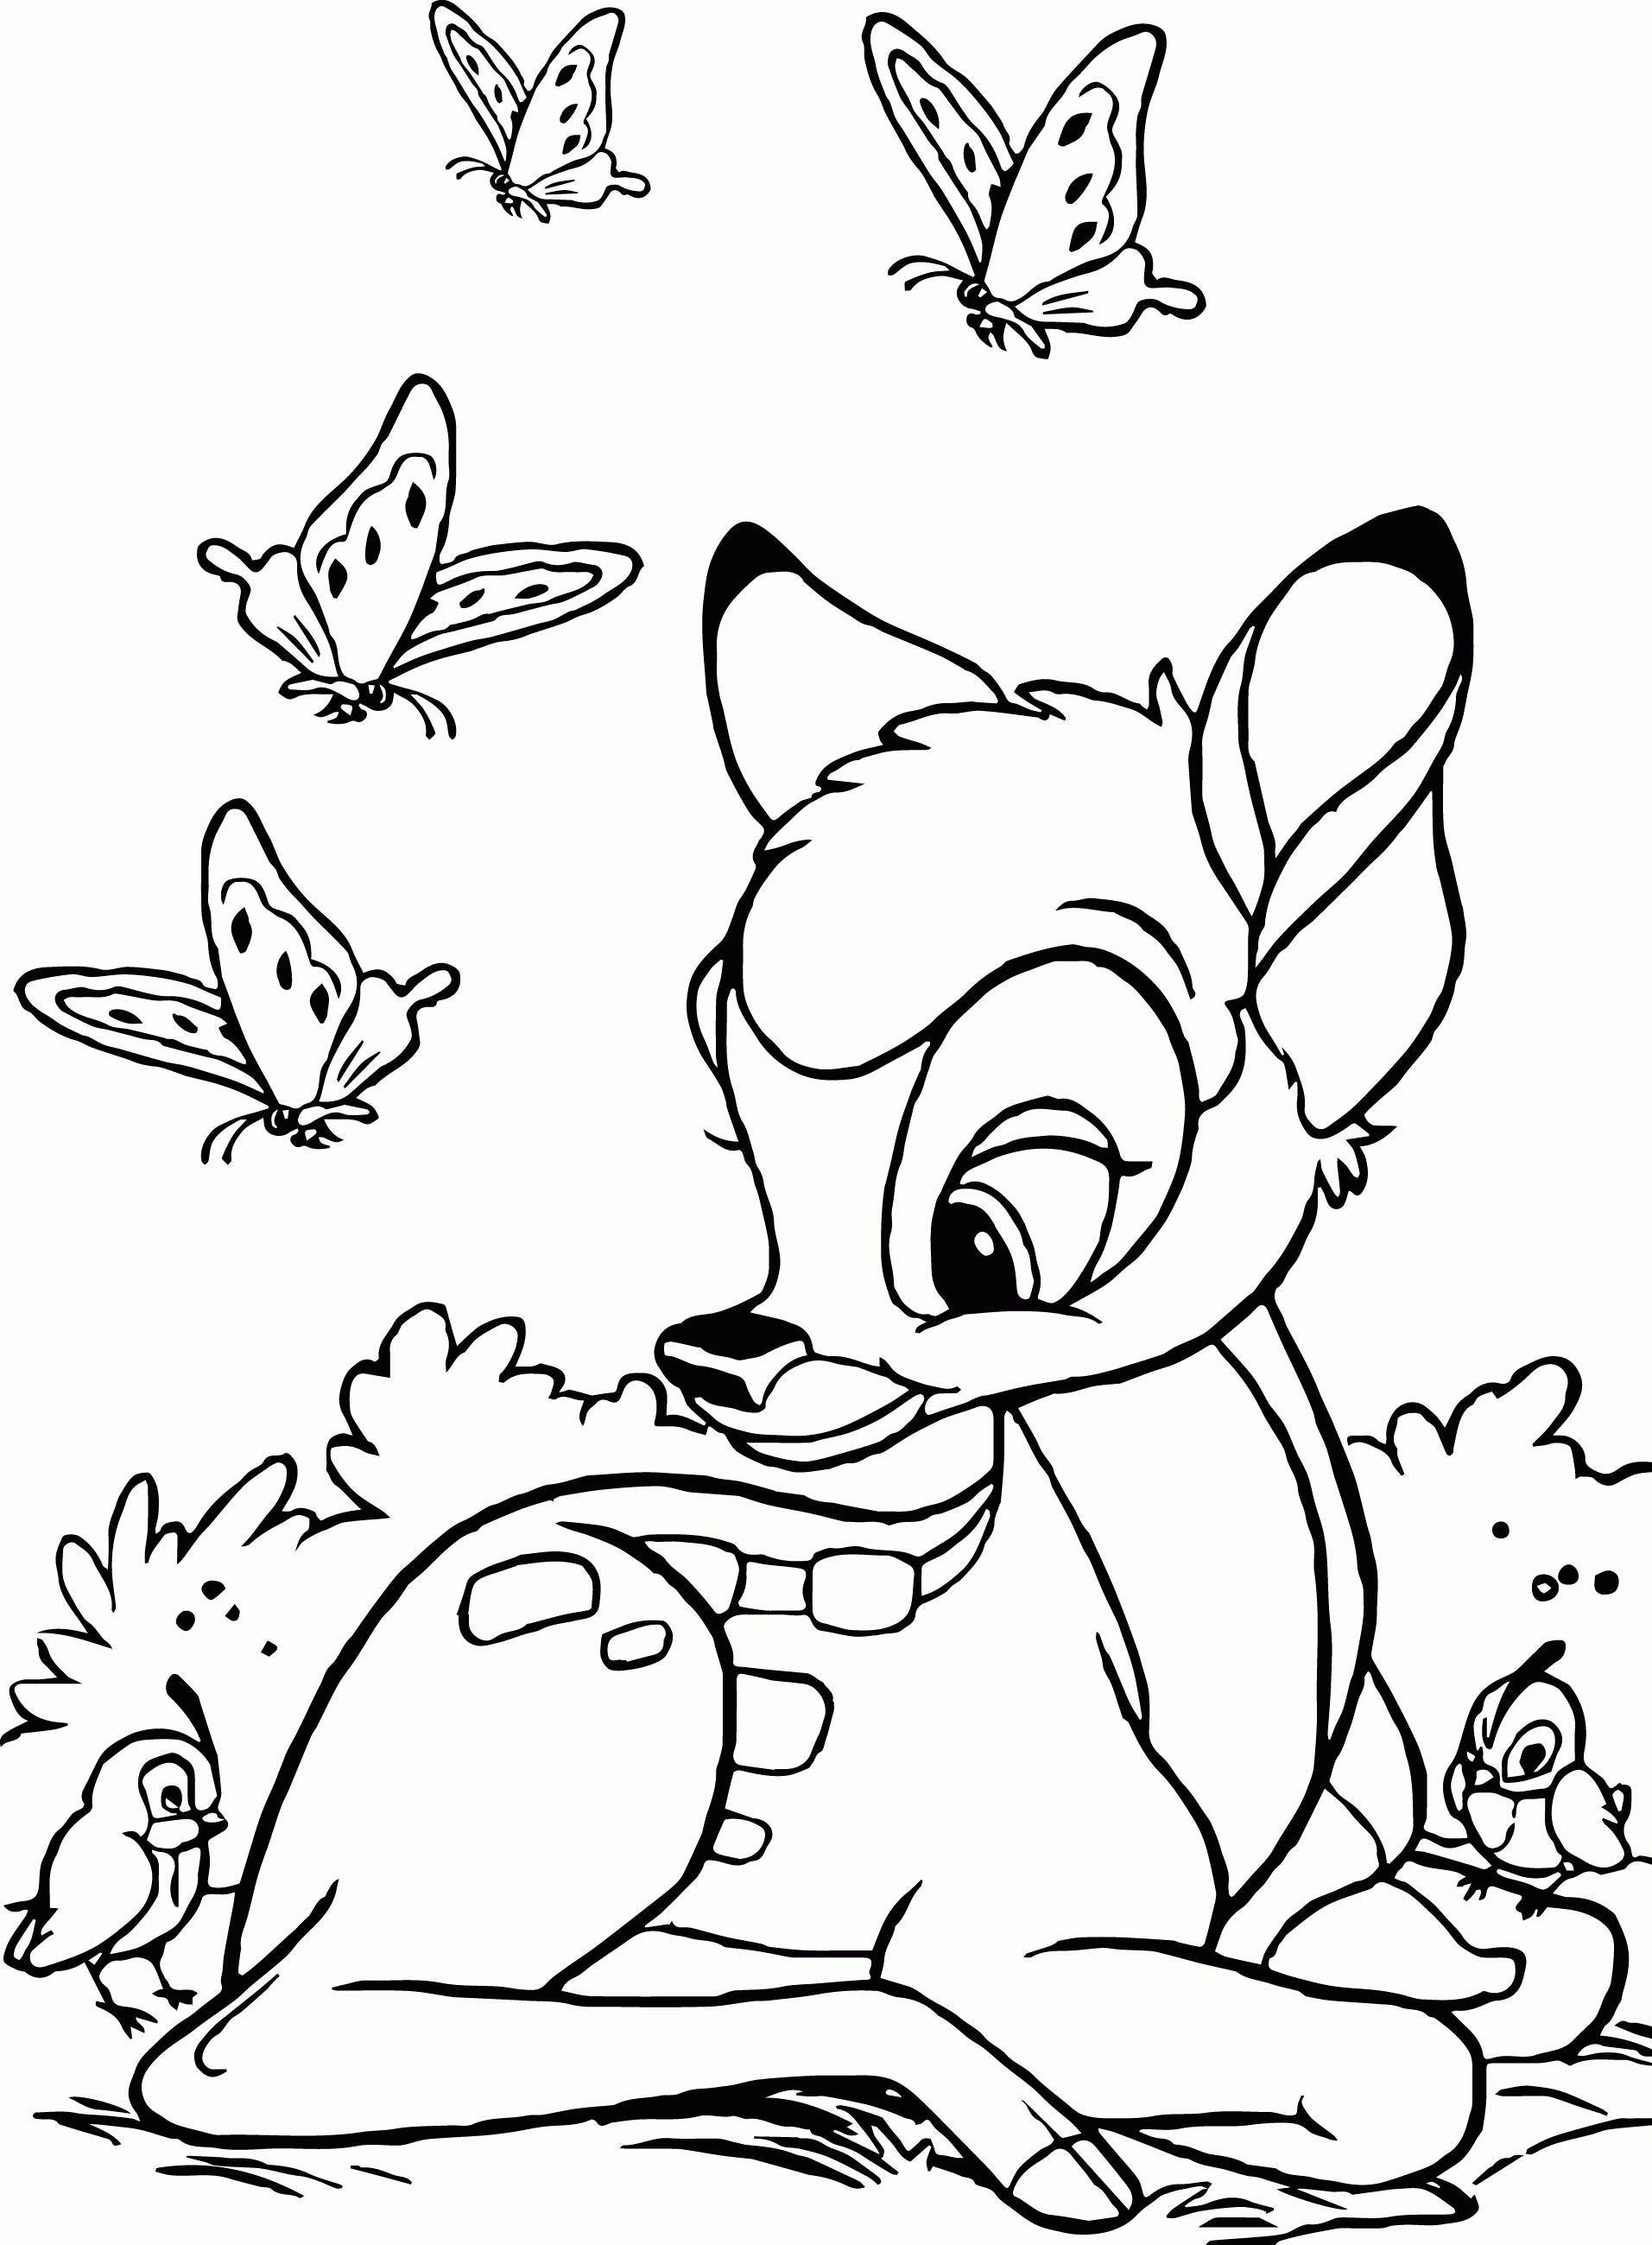 Bambi And Mom Coloring Pages - Coloring Pages For All Ages